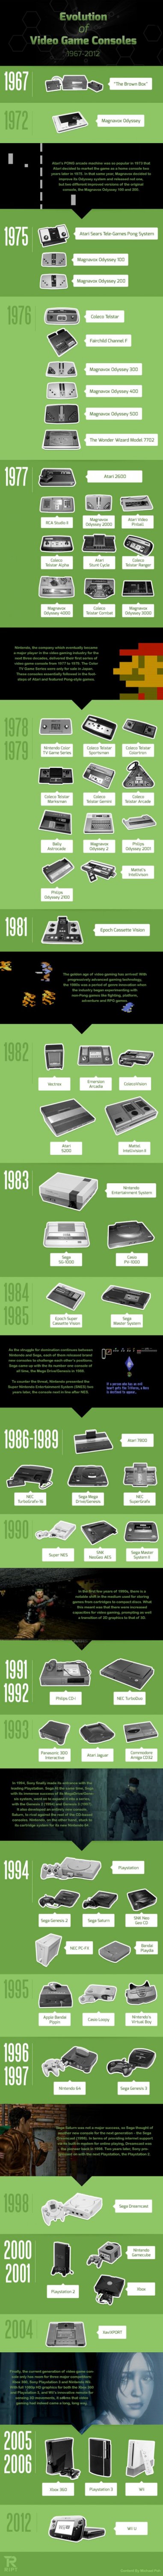 Who knew there were so many consoles?